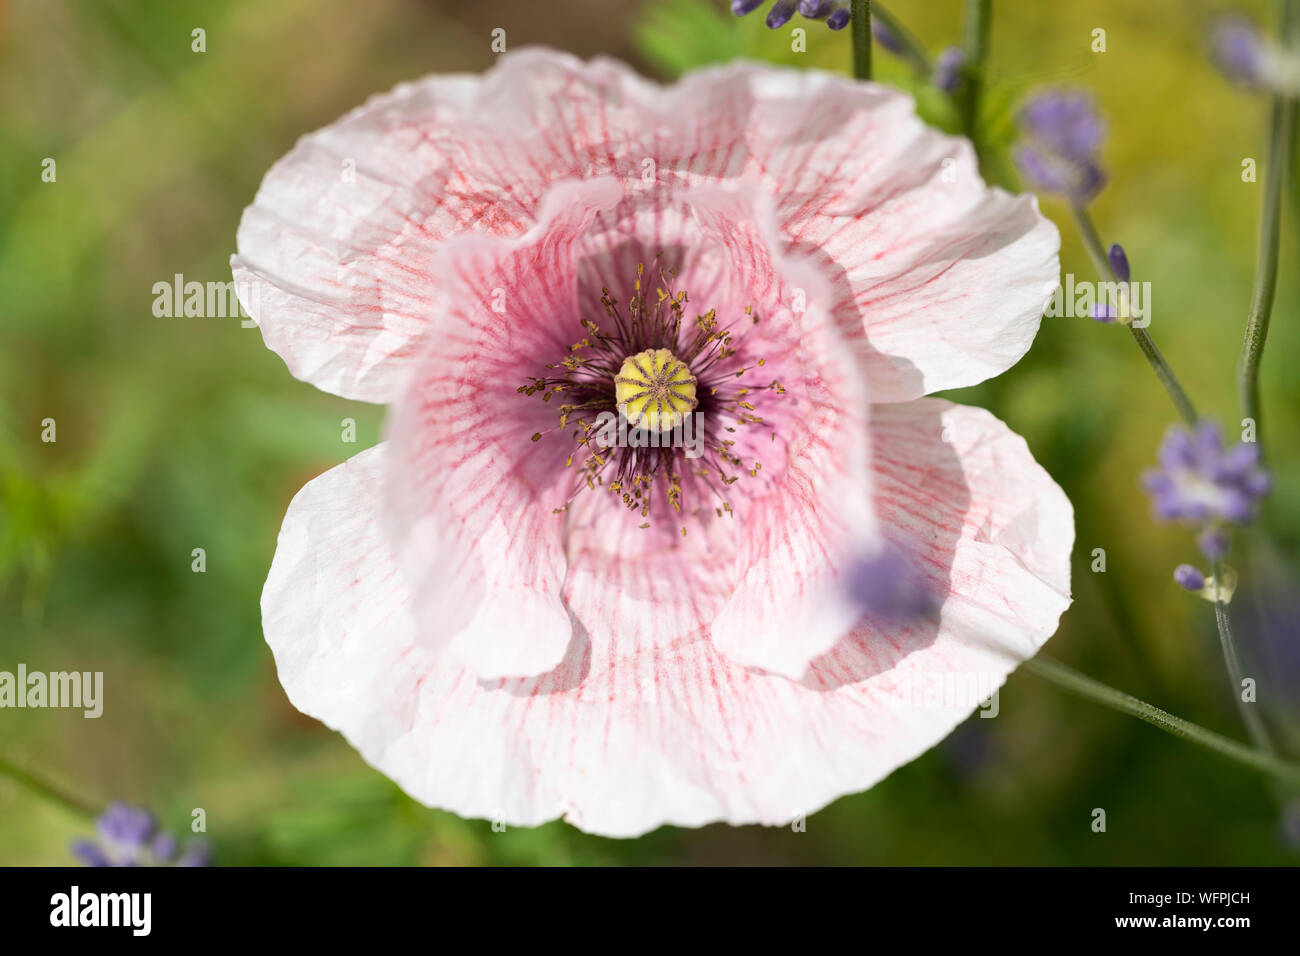 A Papaver nudicaule, or Iceland poppy, with bi-coloured white and pink petals growing in a garden in Lower Austria Stock Photo